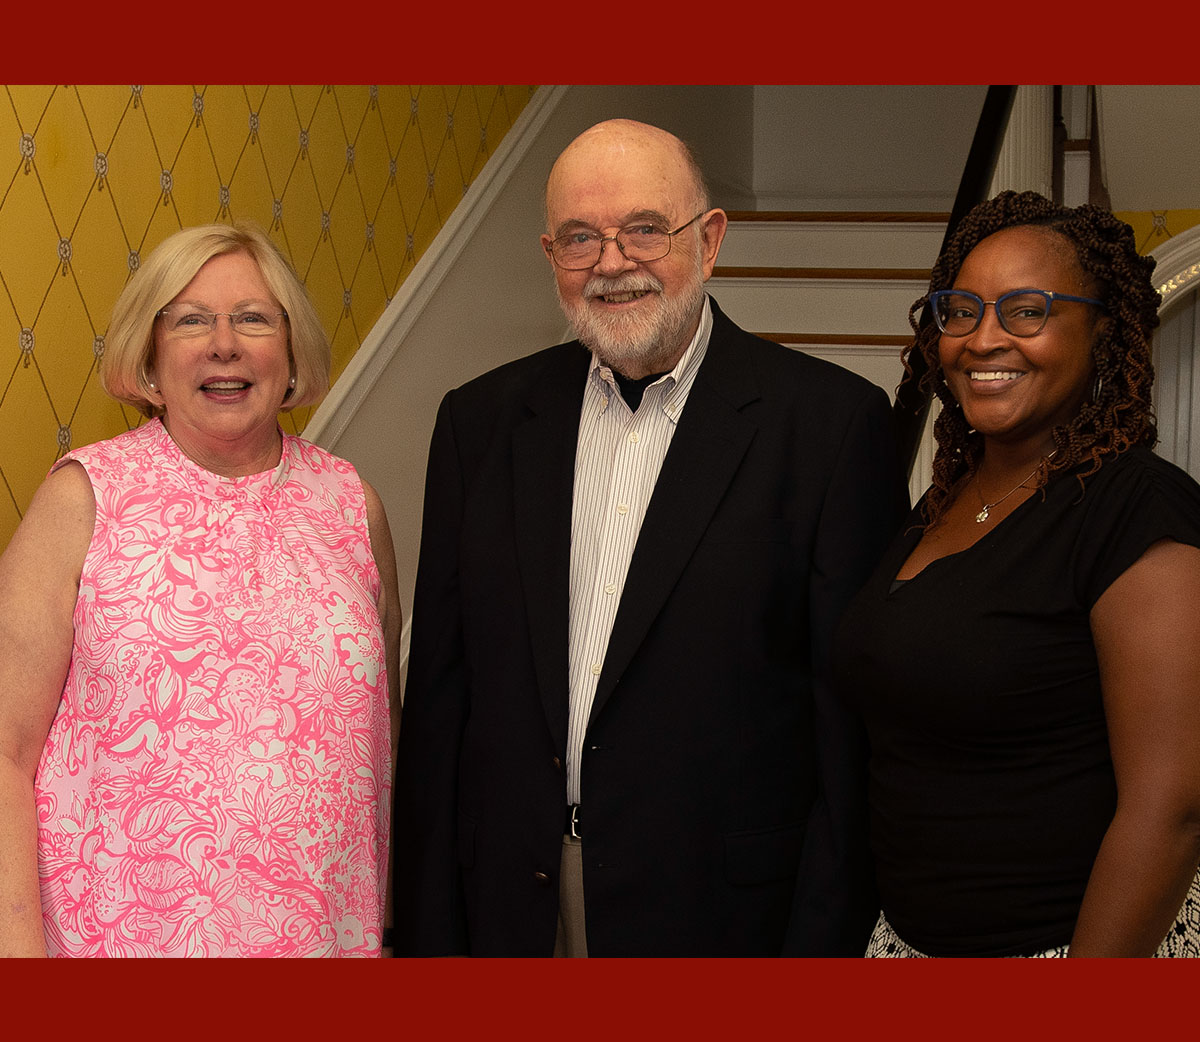 From left to right are Phyllis Vinyard, Dr. Peter Jackson and Sonya Whited.